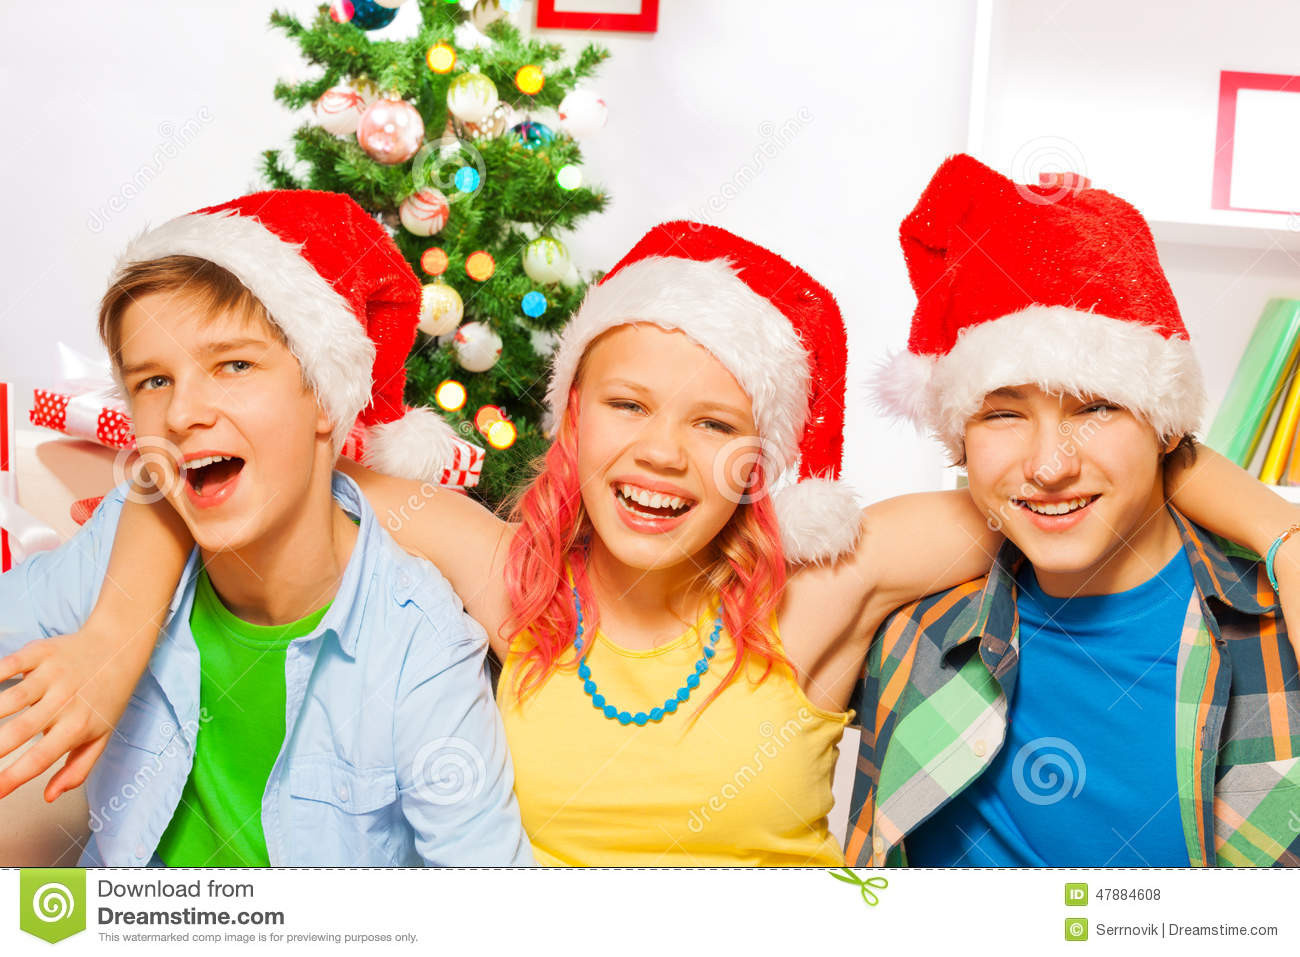 Teenage Christmas Party Ideas
 Christmas Party With Happy Teens Stock Image of